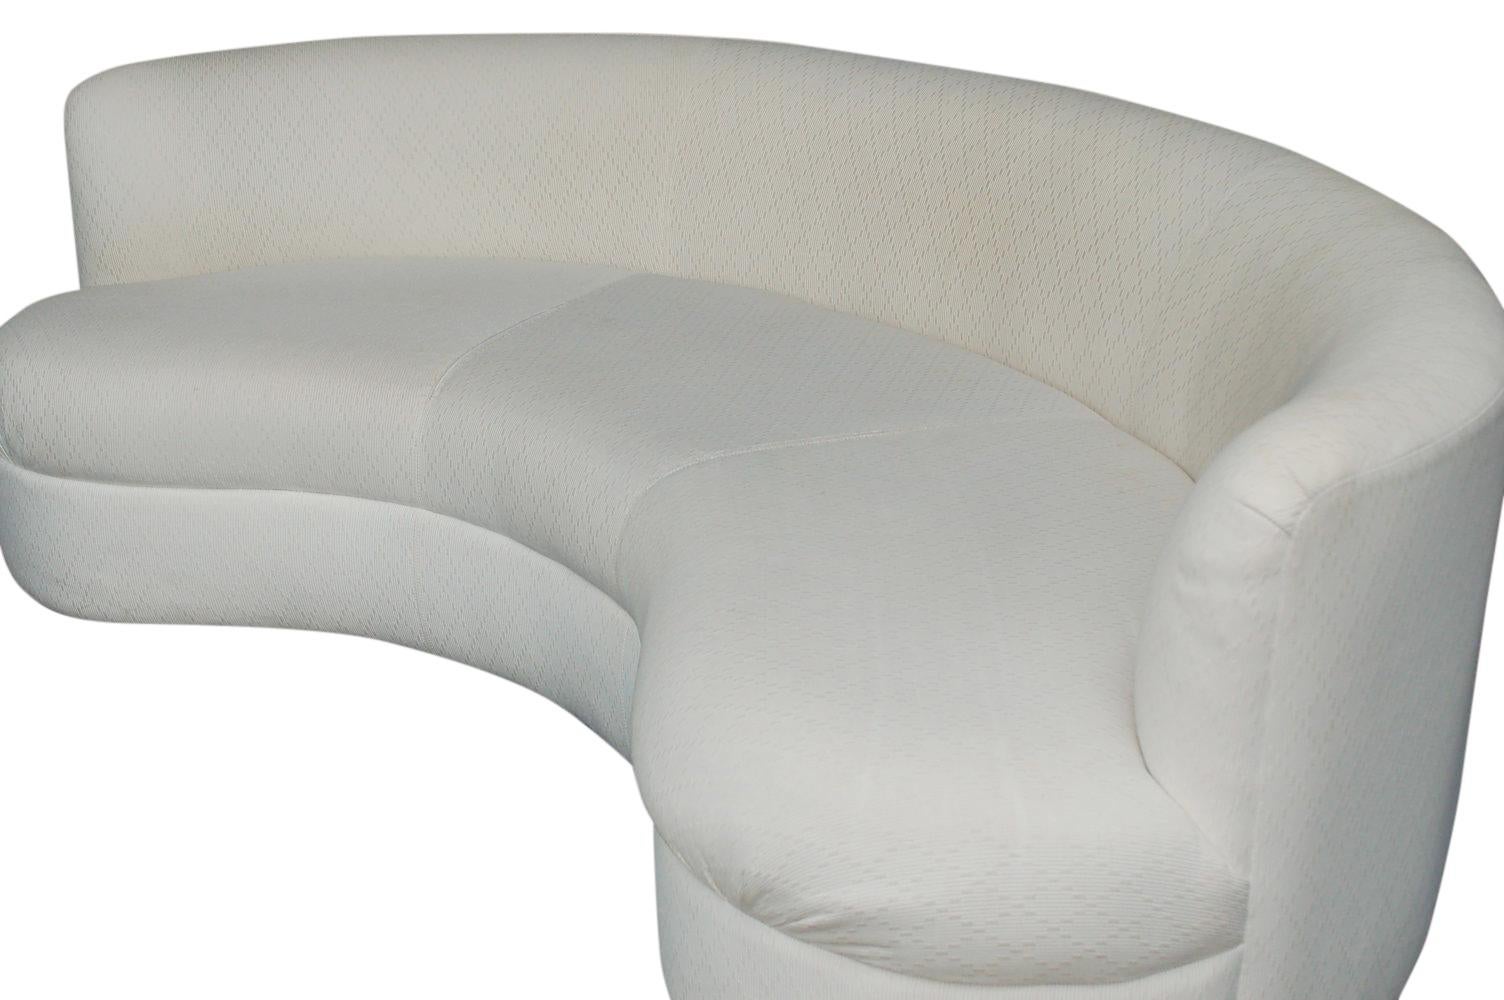 Late 20th Century Pair of Midcentury Italian Modern Curved Kidney Bean Cloud Sofa Set in White